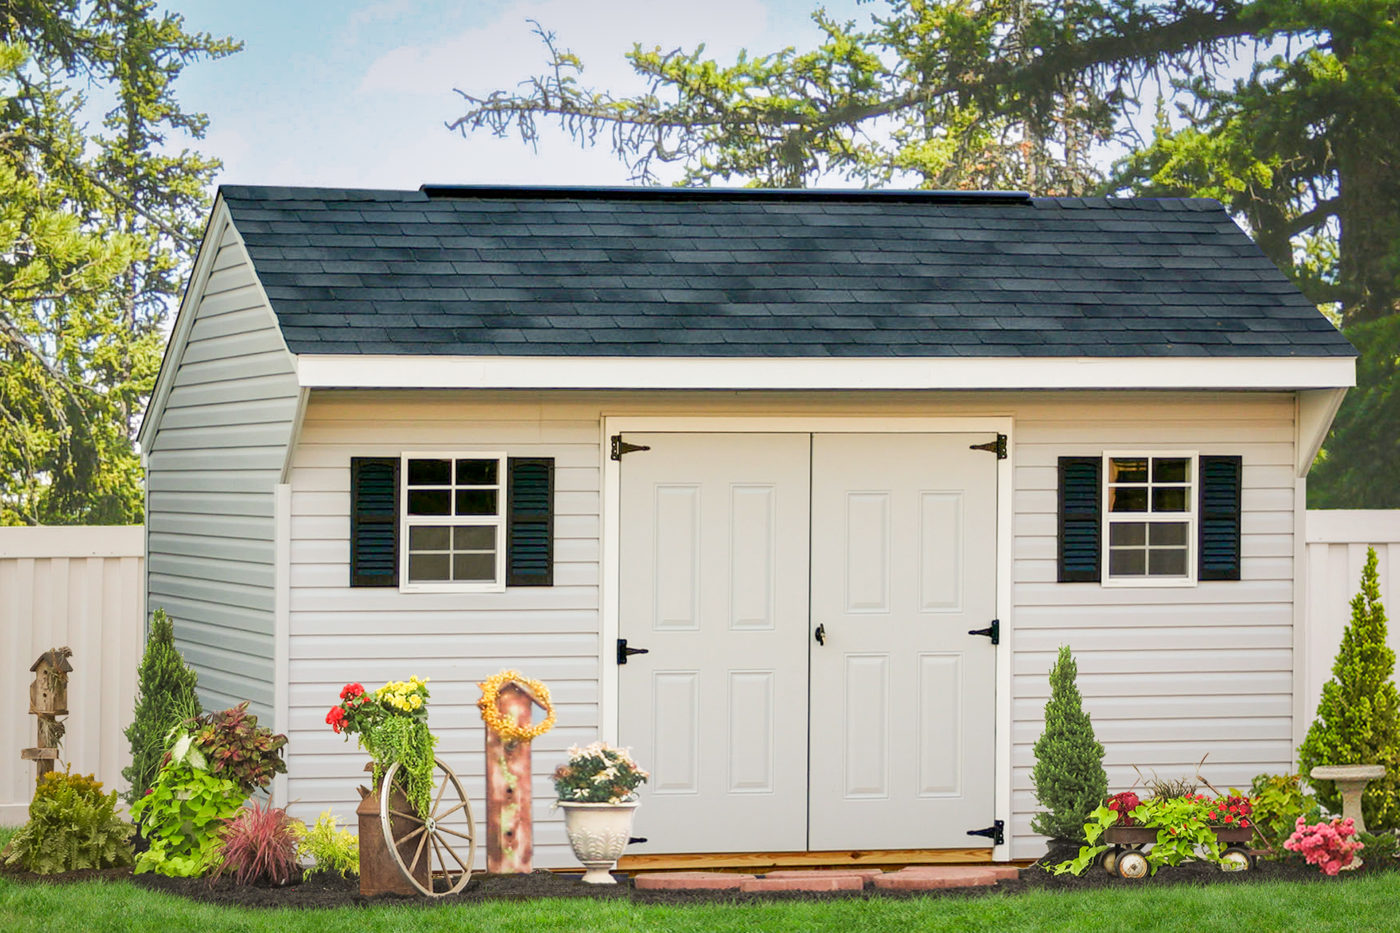 A garden shed kit with vinyl siding